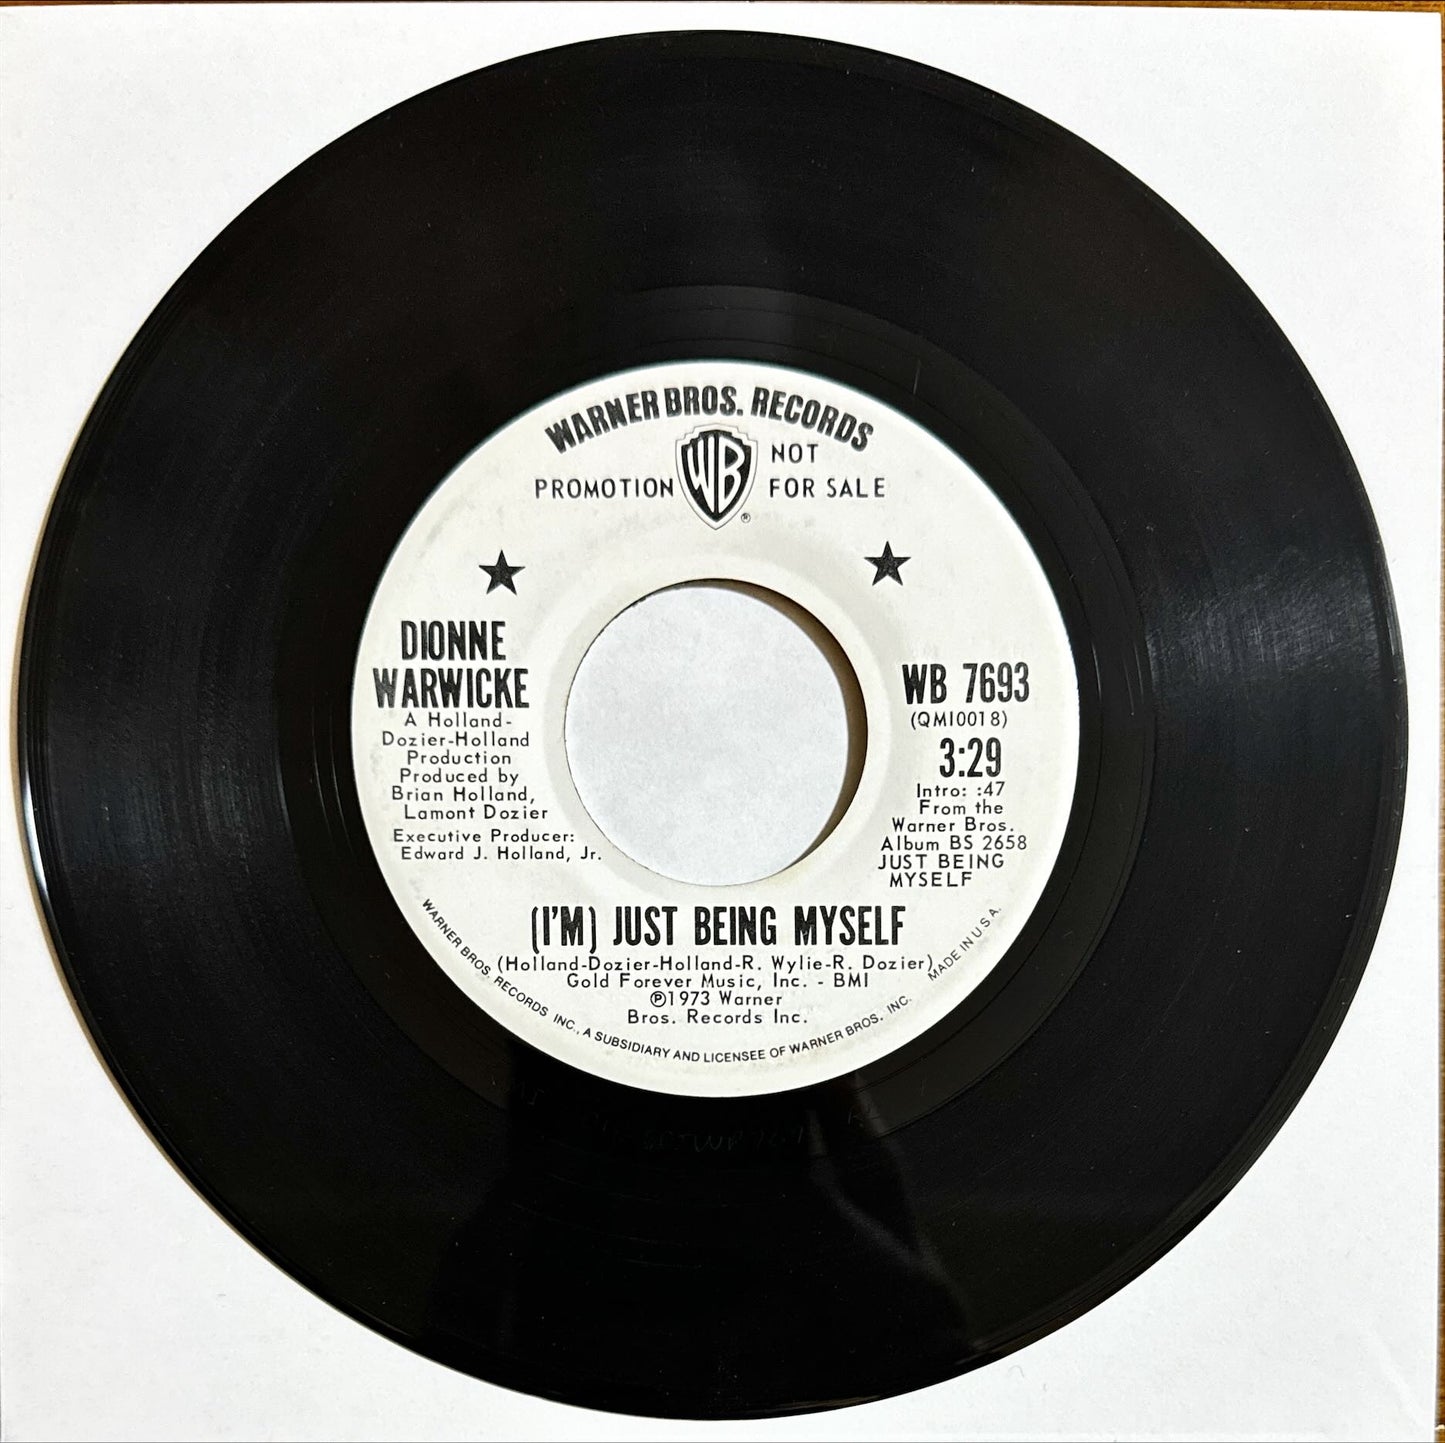 Dionne Warwicke – You're Gonna Need Me / (I'm) Just Being Myself ( Warner Bros. Records US Promo ) 7inch